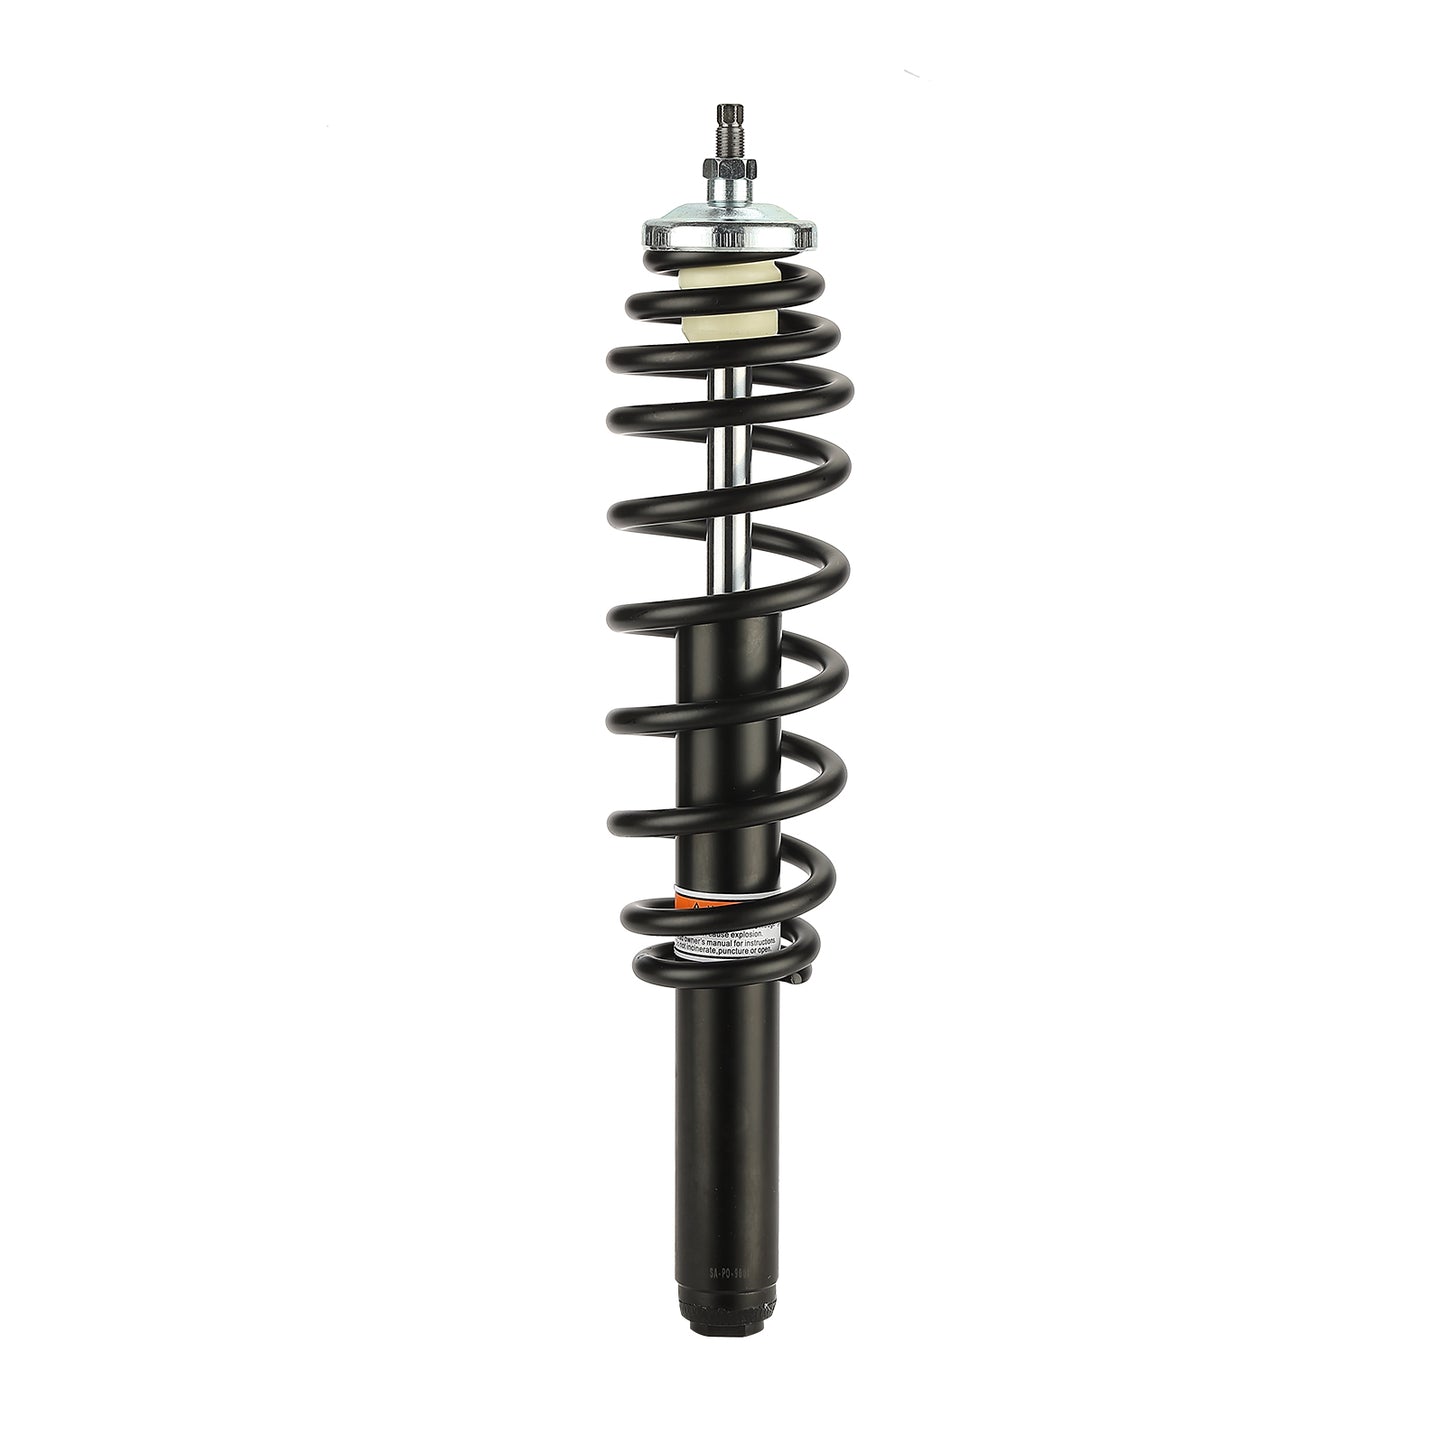 CAM-PO900 Caiman Shock Absorber ATV Front Left Right Shock Absorber Replacement for 2004-2005 Polaris Ranger 500 1999 Polaris Ranger 500 Front Shock